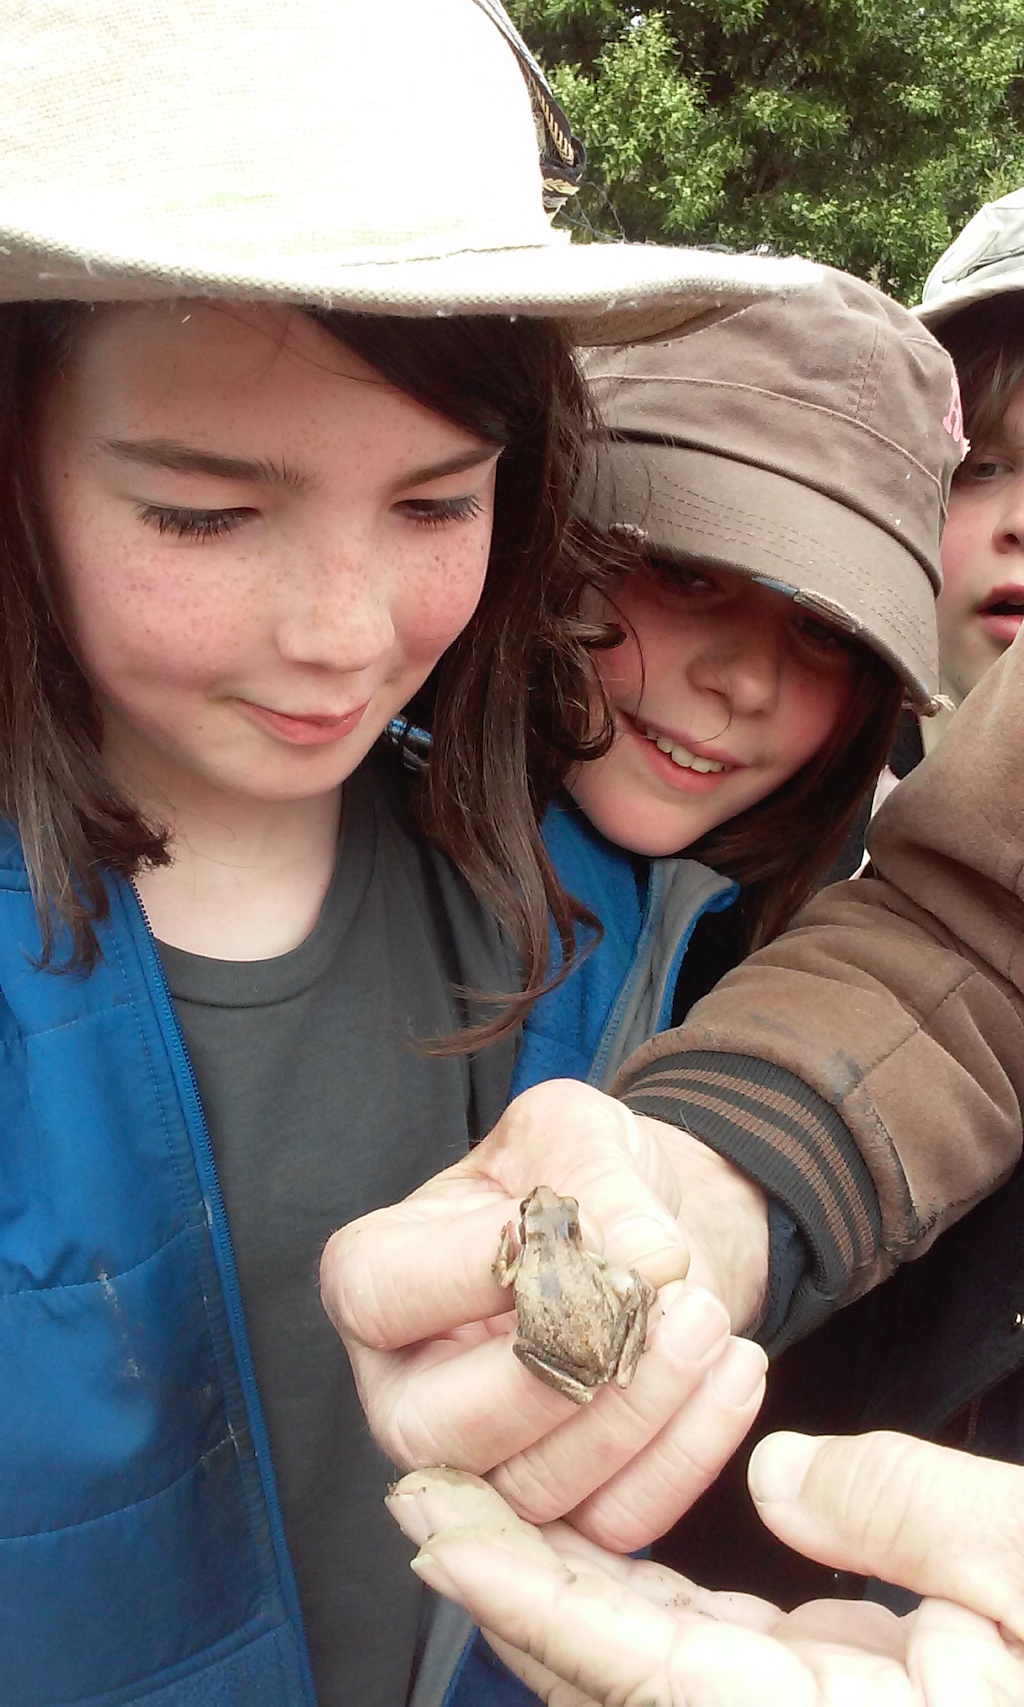 Children looking at a tiny frog in someone's hand